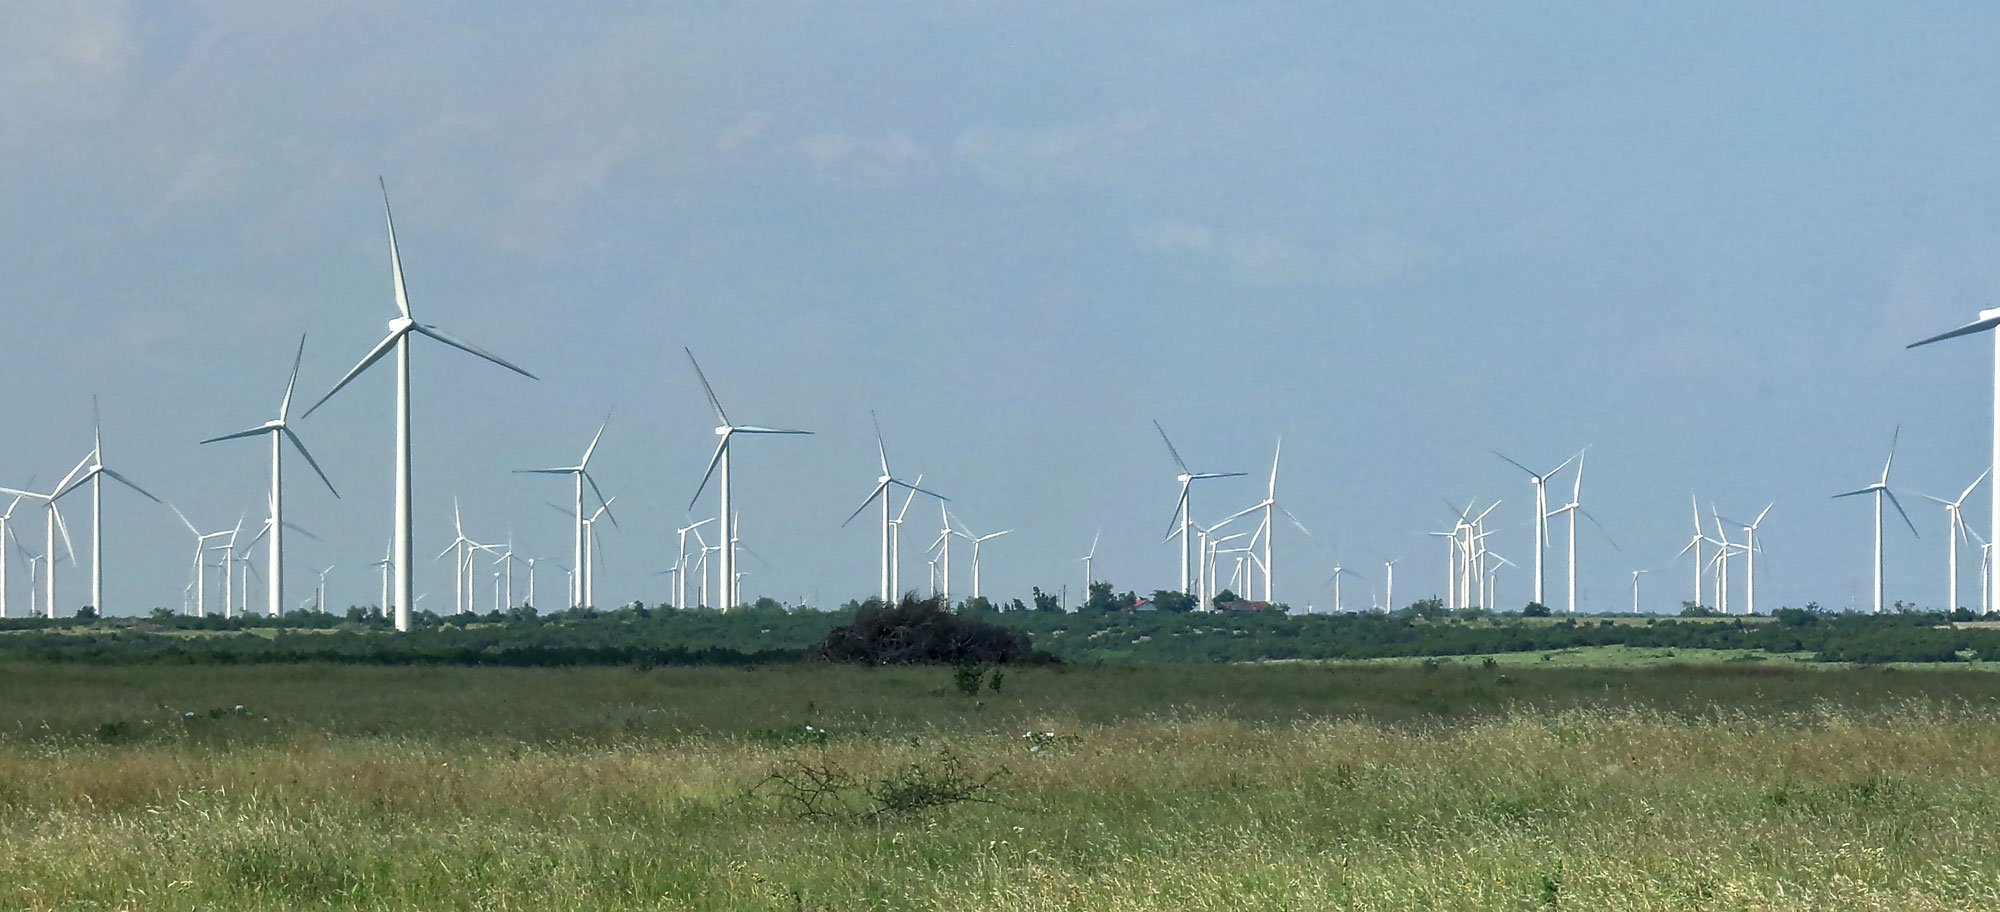 Photograph of a wind farm in Texas. Large wind turbines dot a landscape.